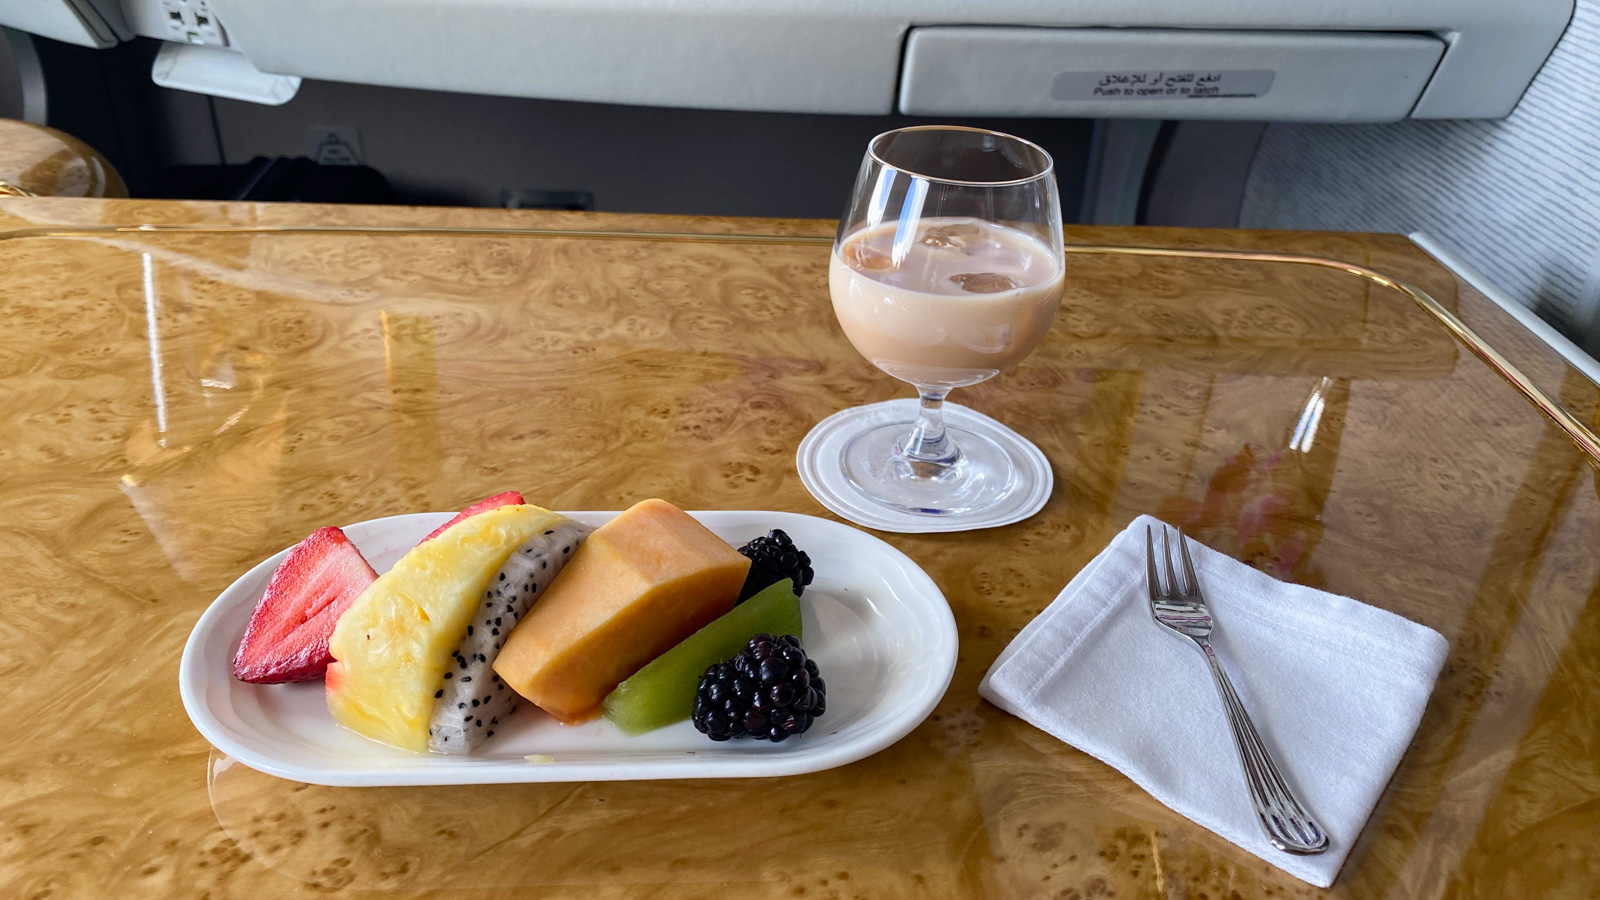 Emirates First Class amarula and fruit plate